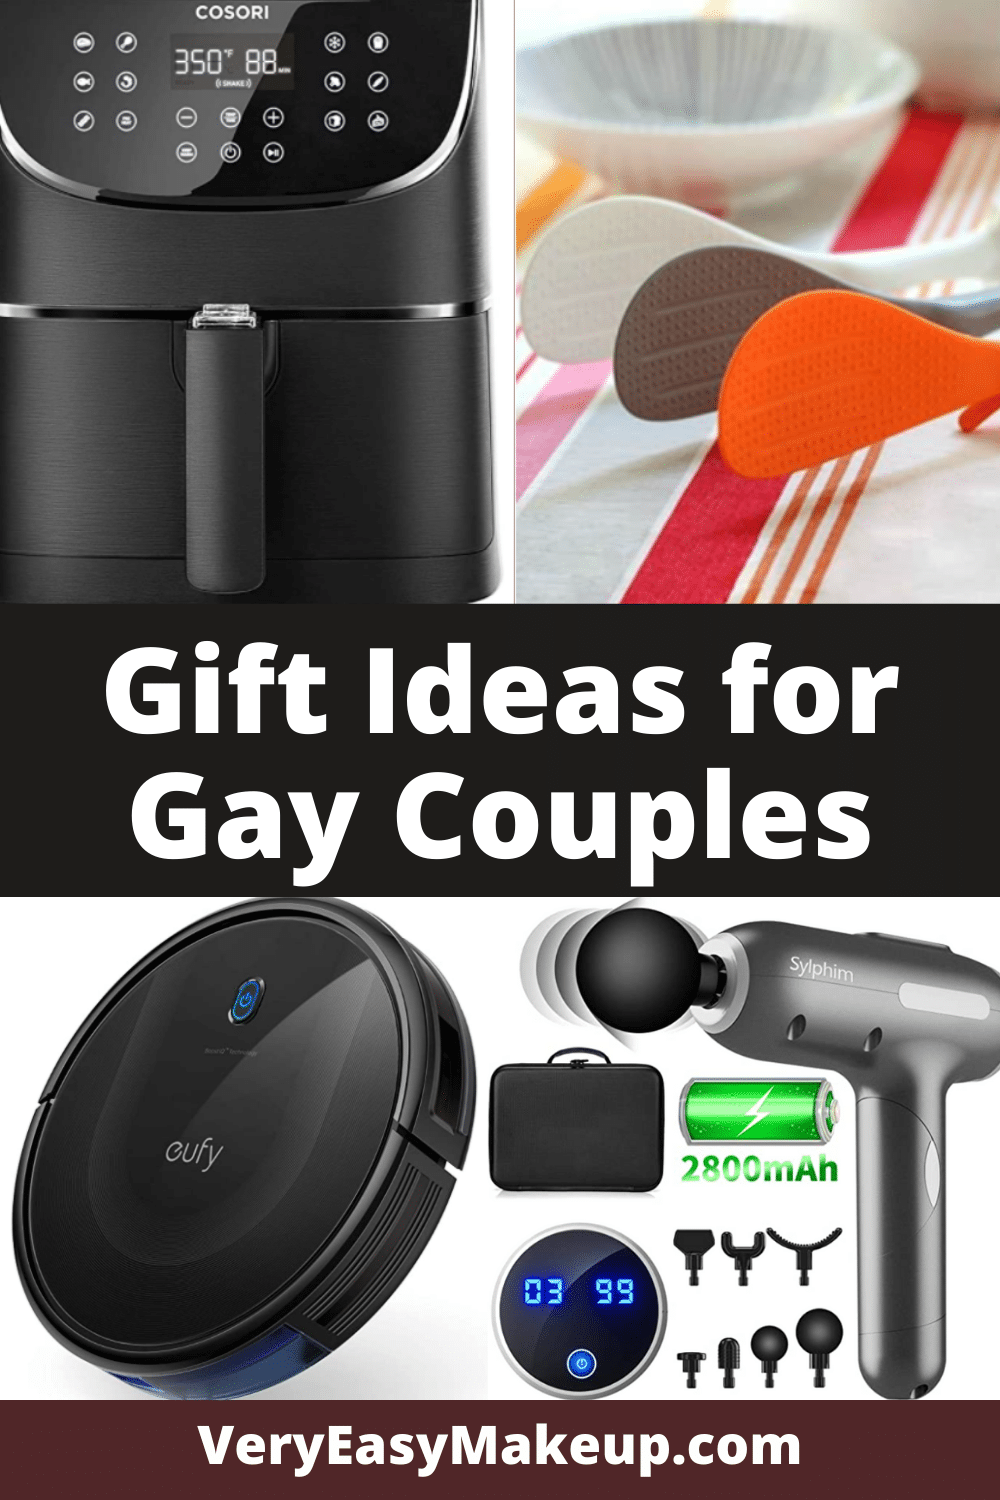 Gift Ideas for Gay Couples